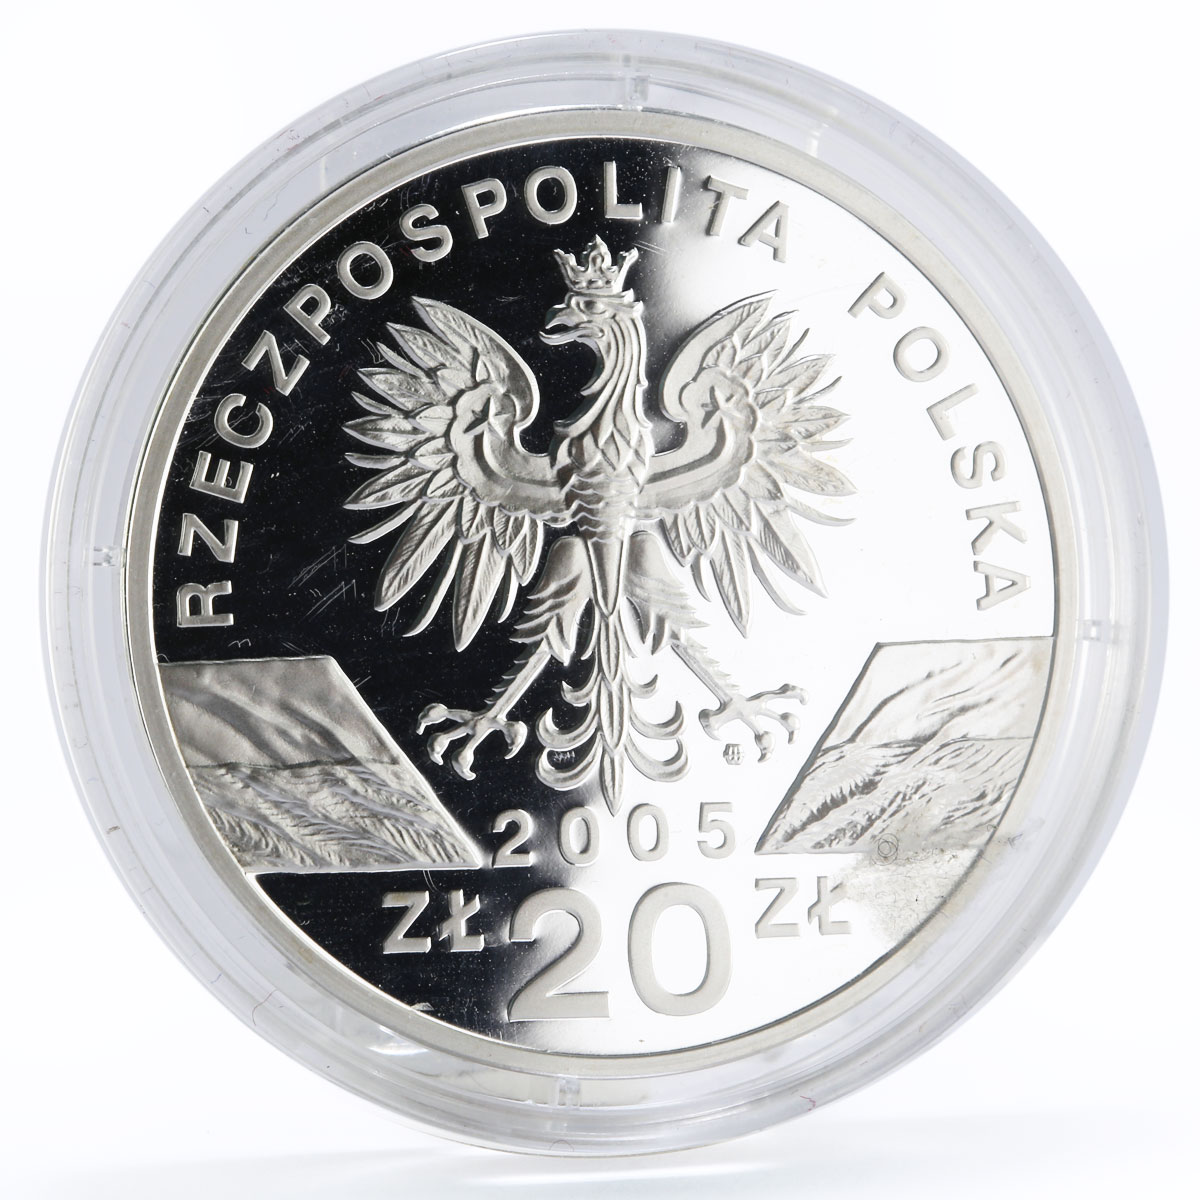 Poland 20 zlotych Endangered Wildlife series Eagle Owl proof silver coin 2005